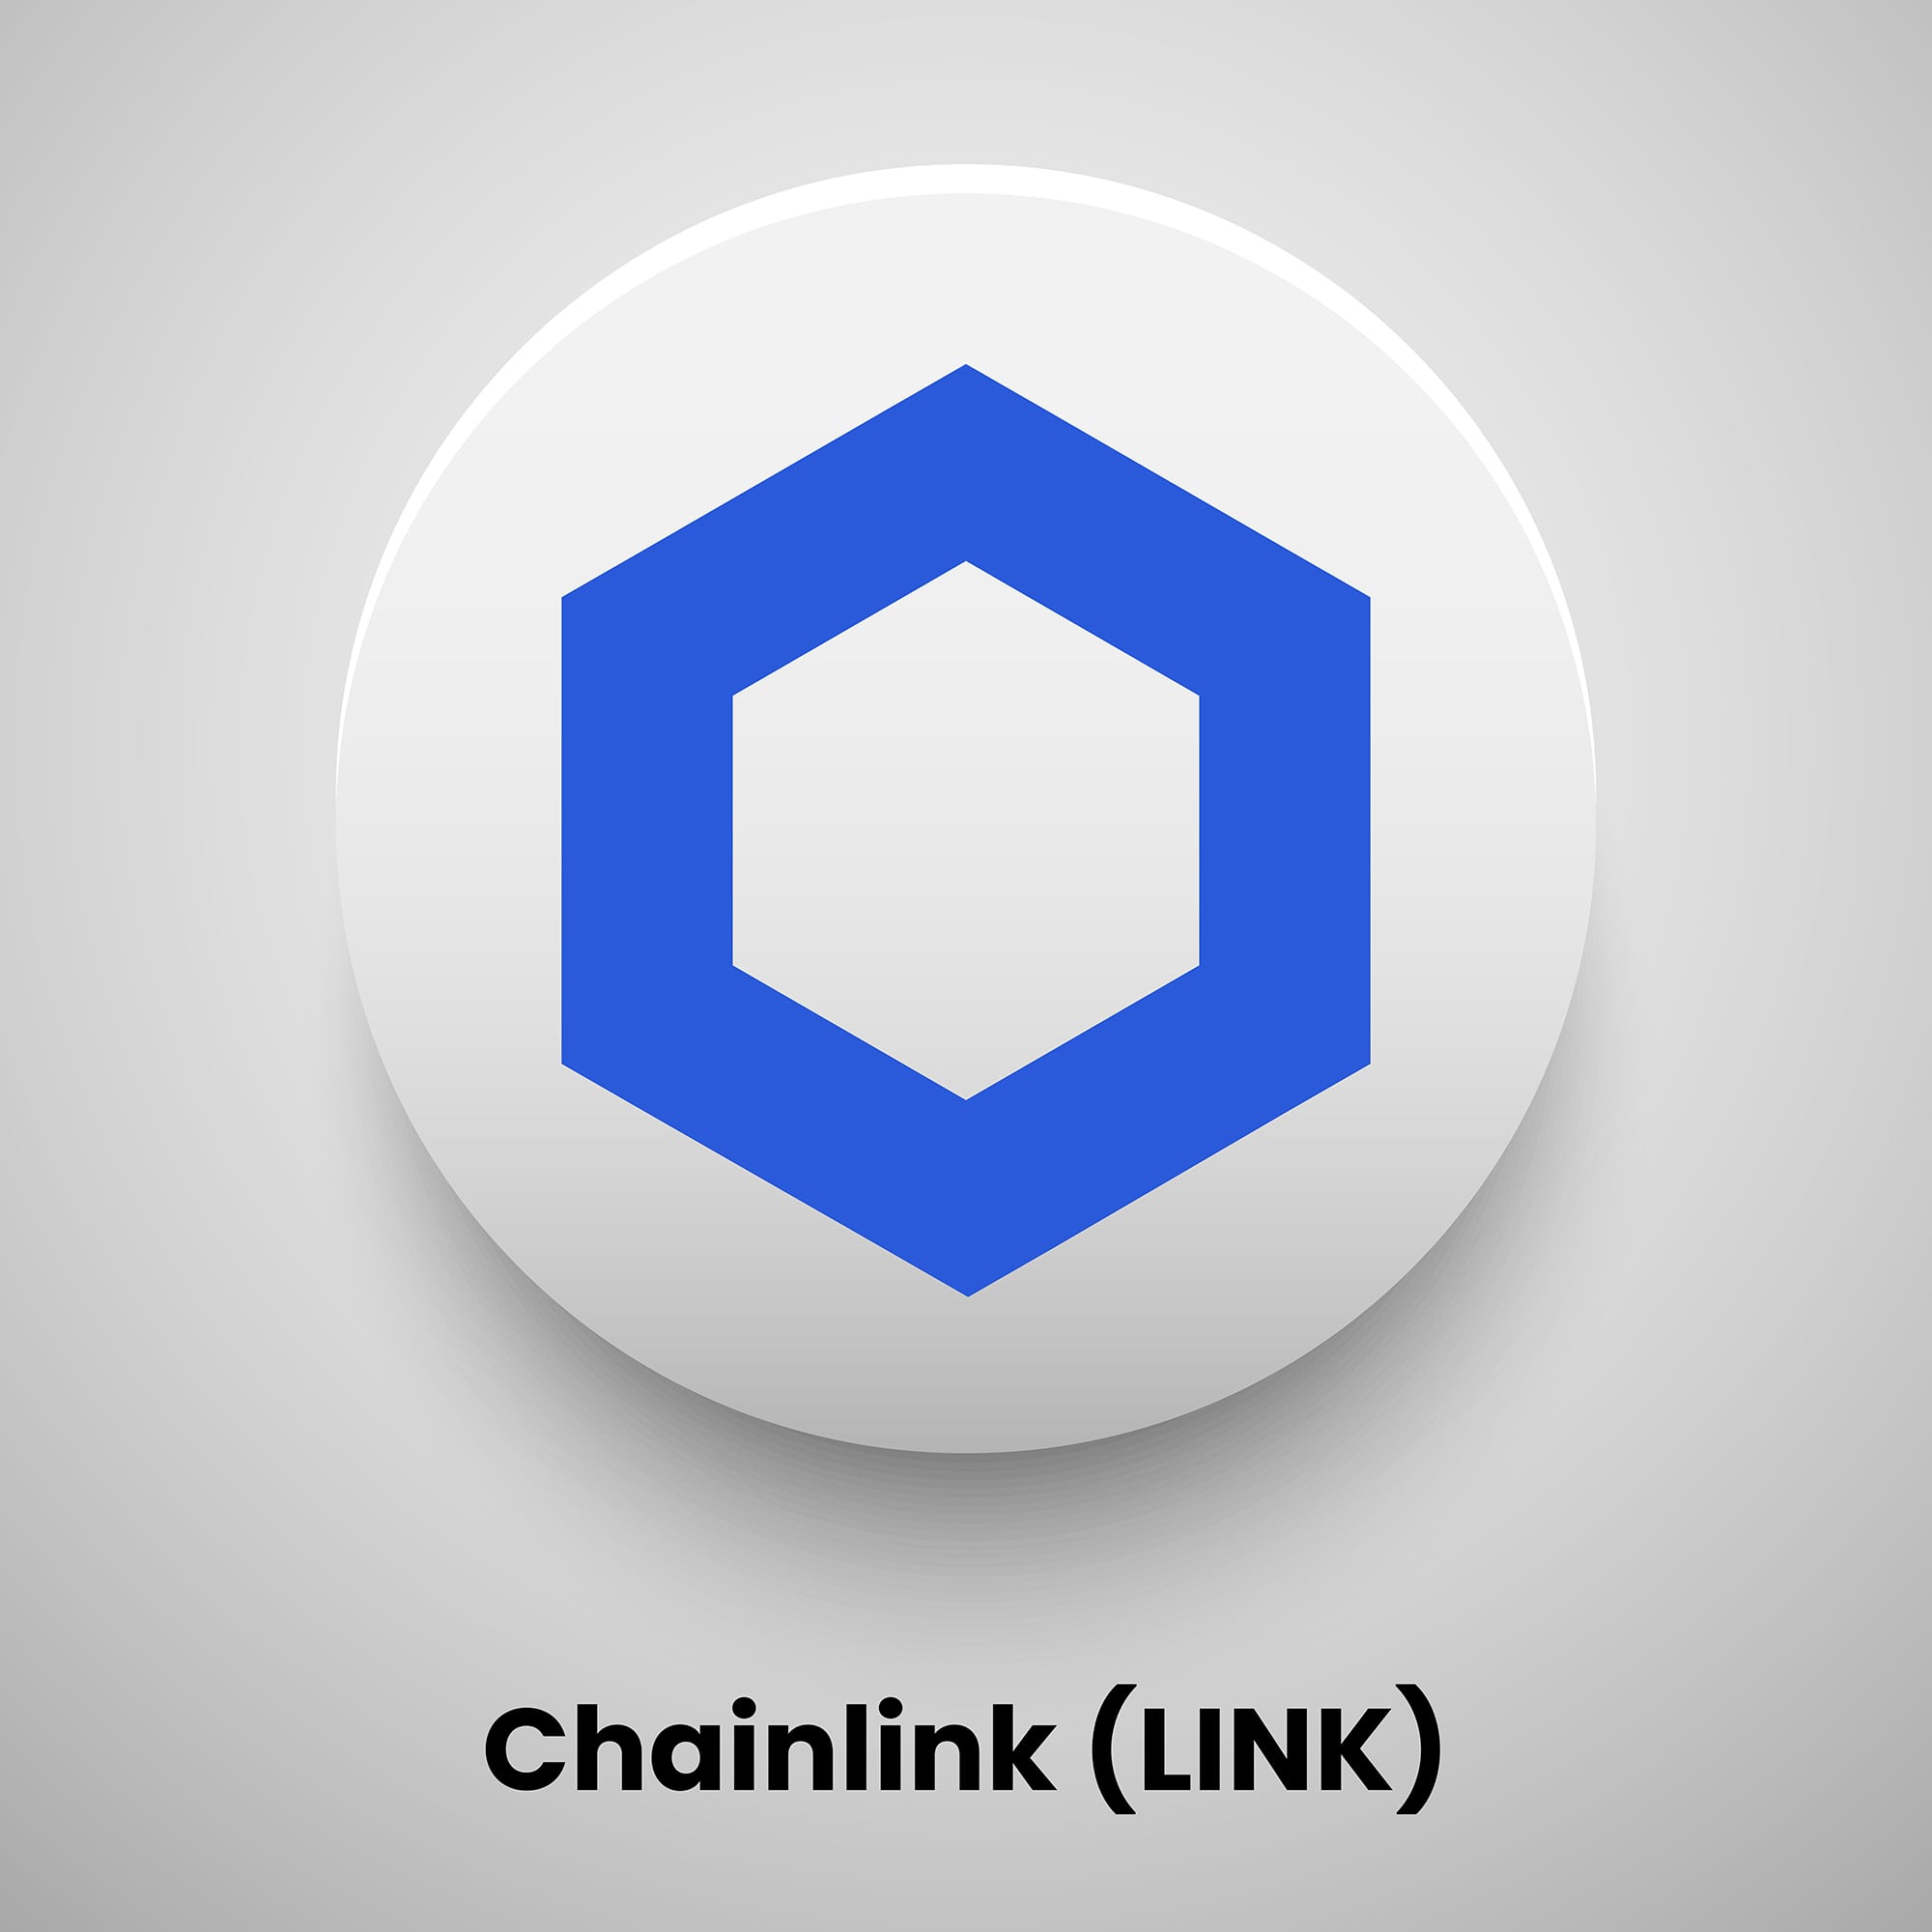 Chainlink Crypto currency logo free vector download